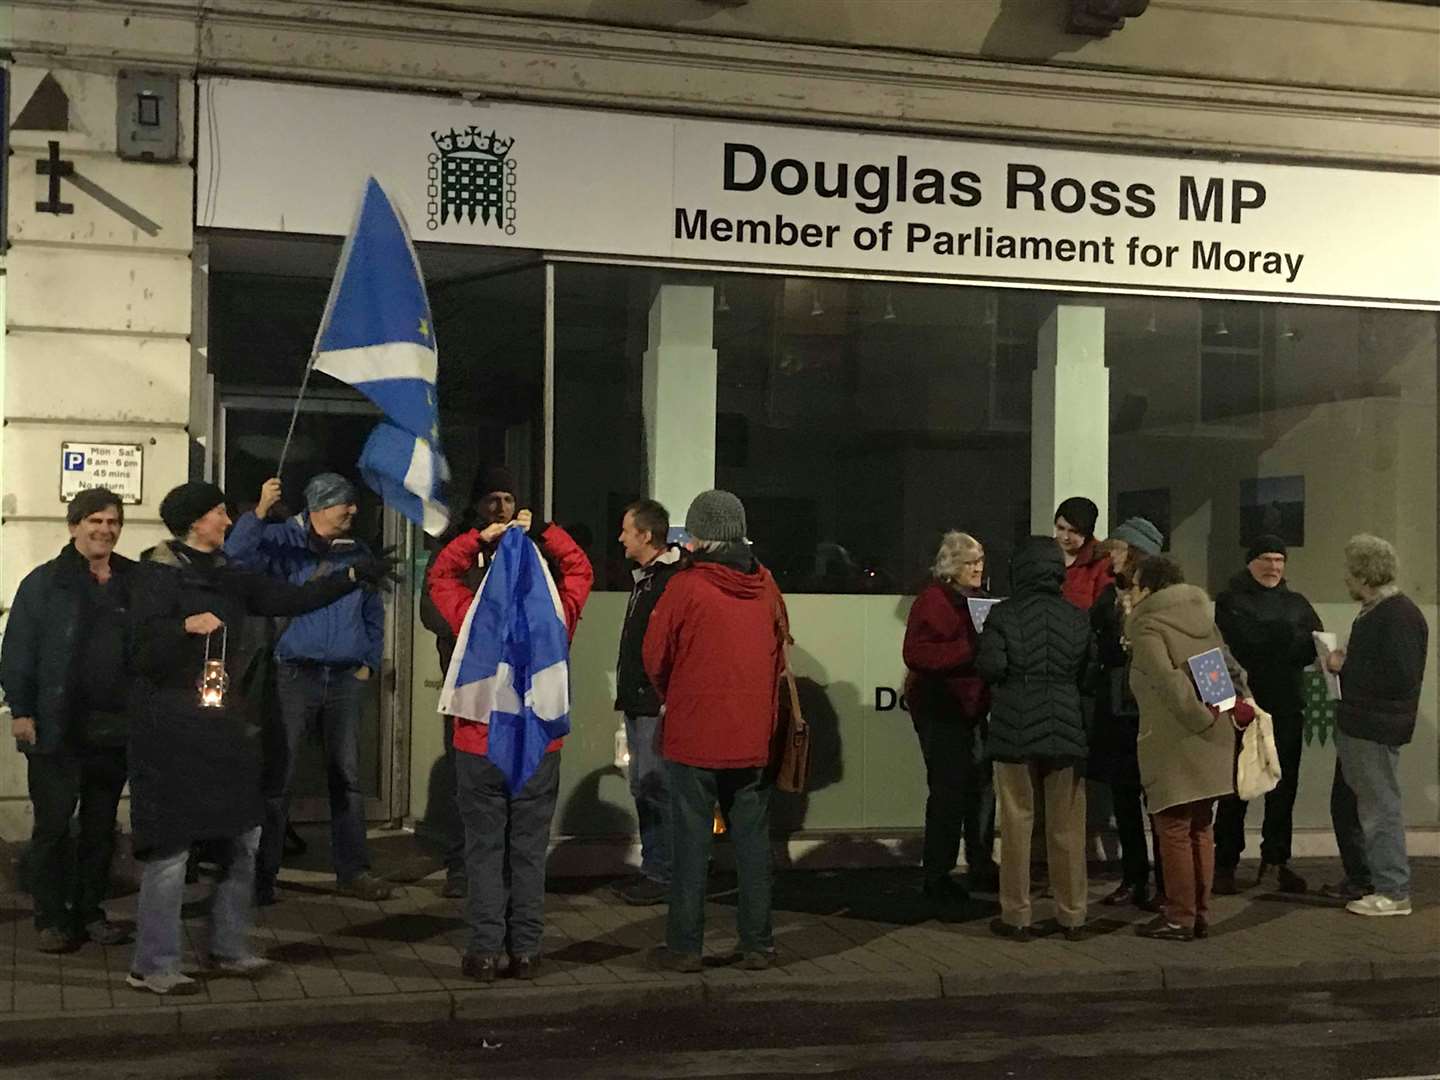 Part of the gathering outside Douglas Ross MP's office on Friday evening.